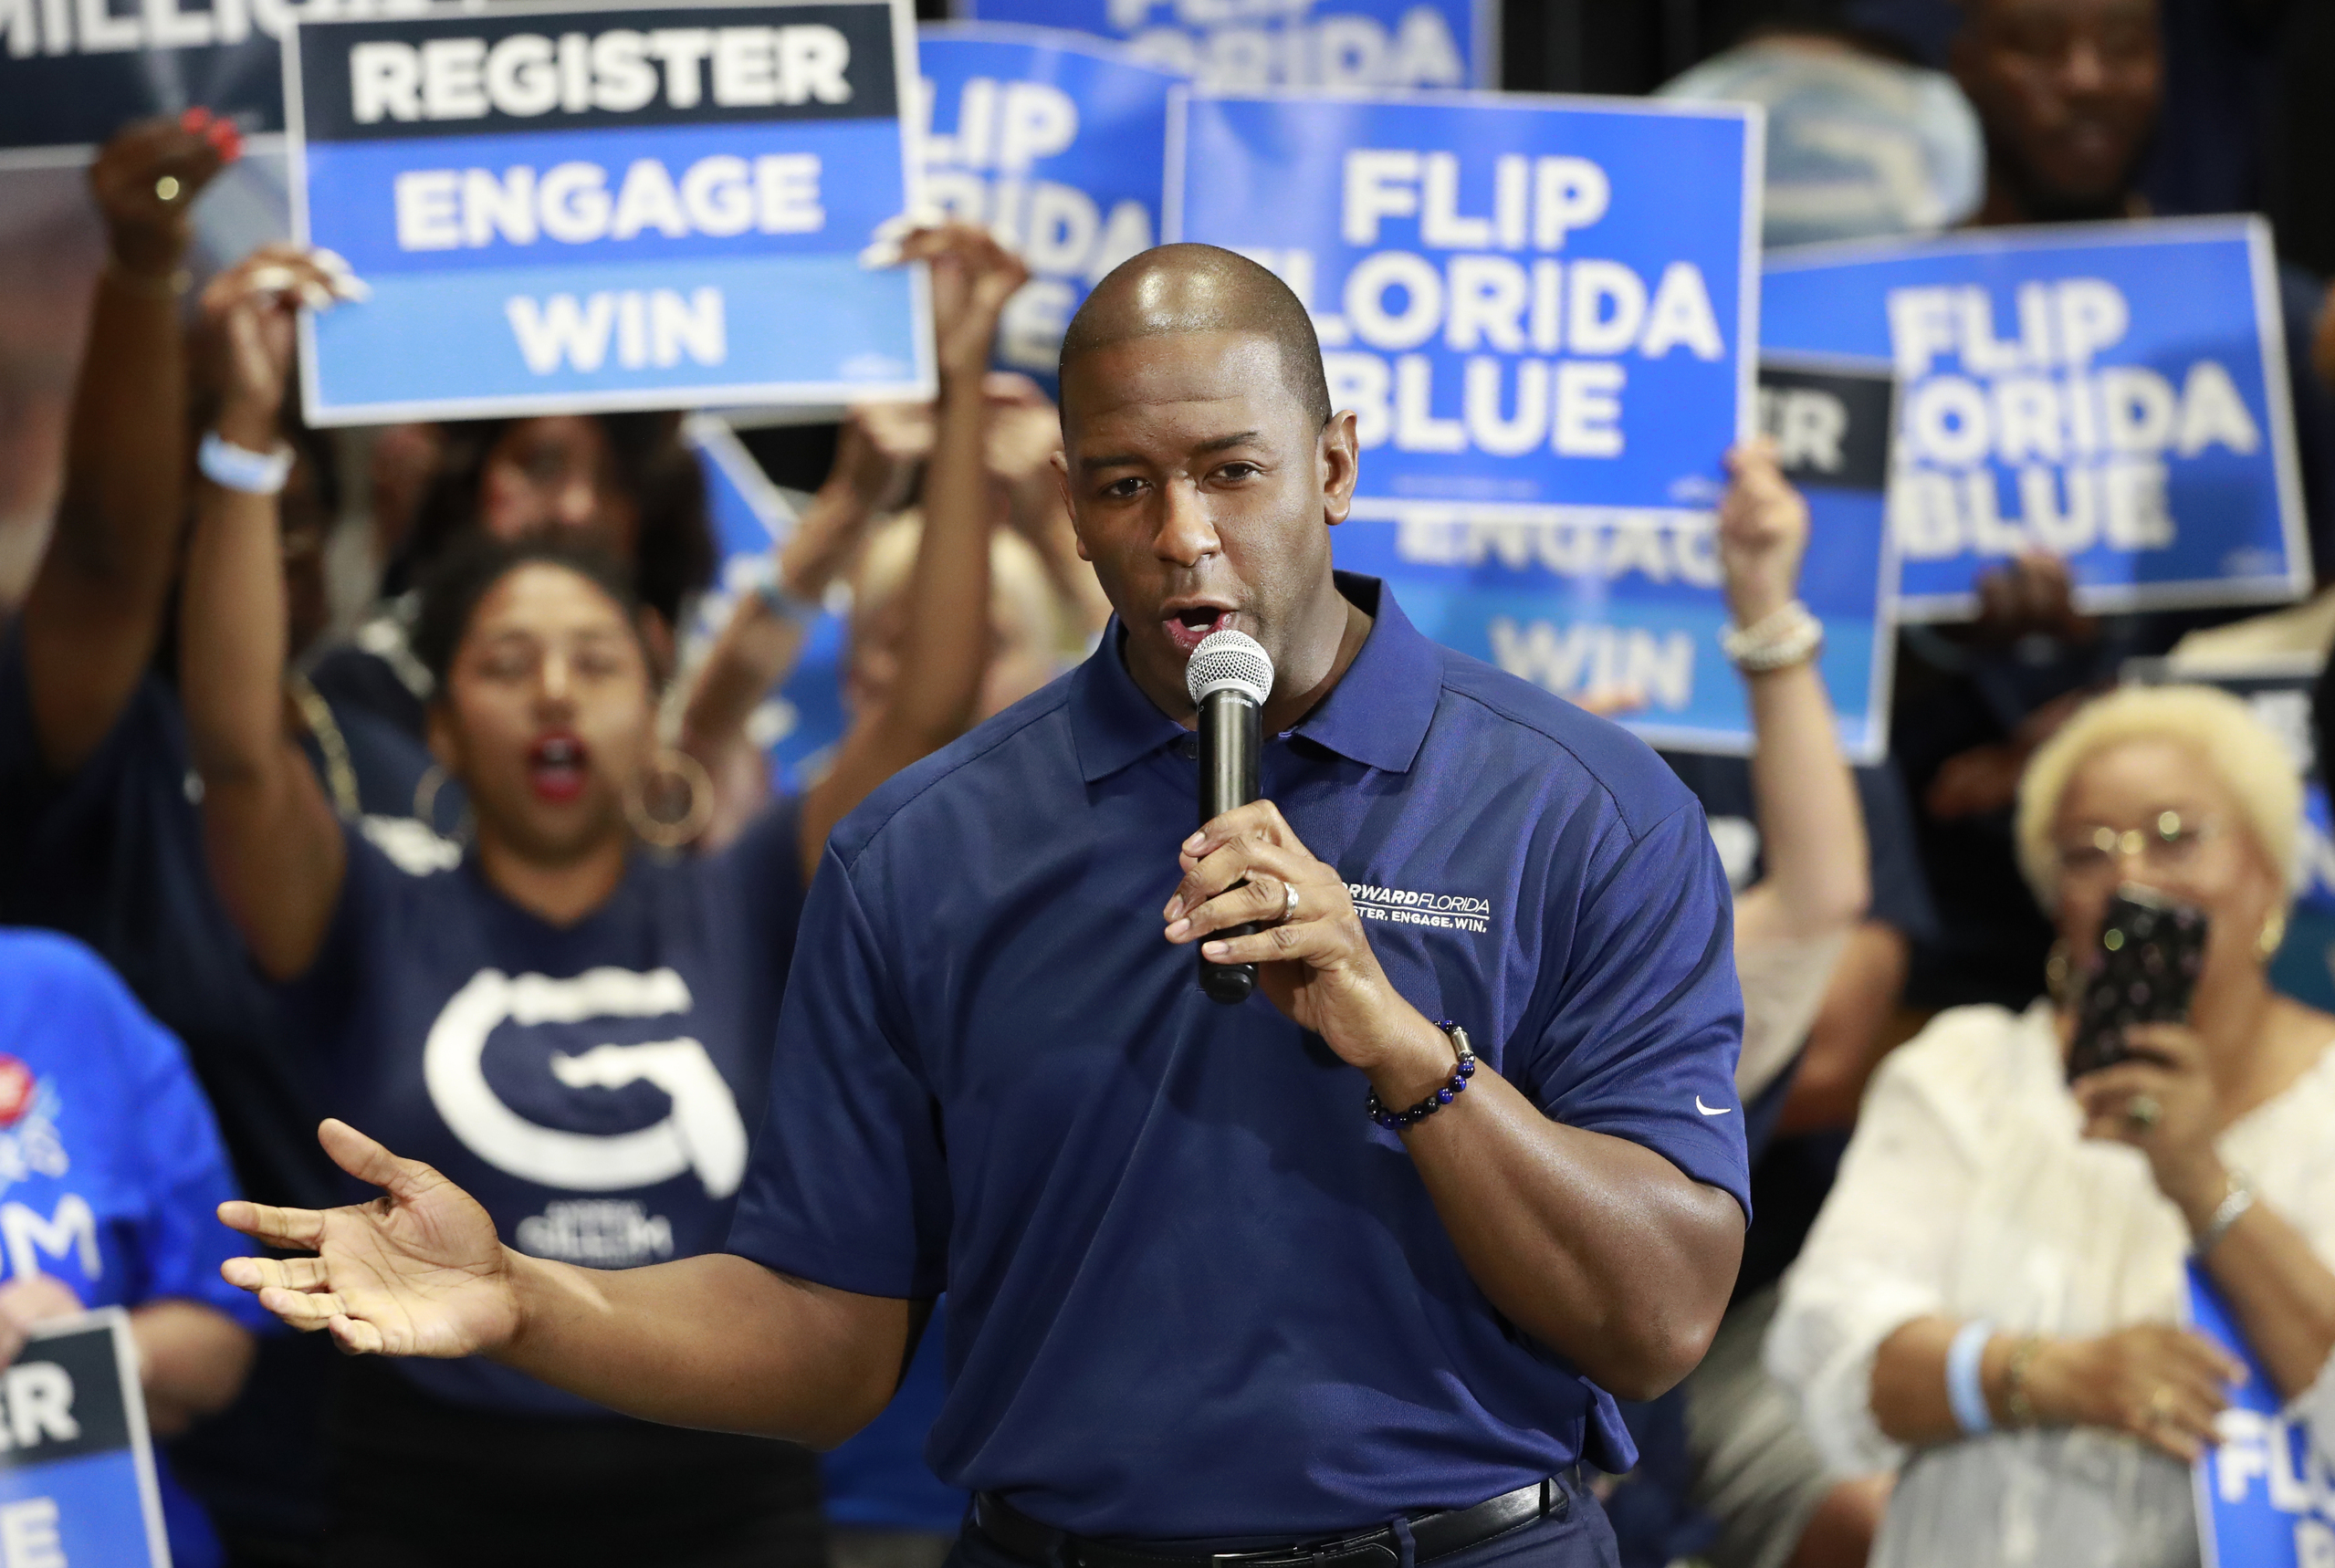 Former Florida gubernatorial candidate Andrew Gillum indicted on federal charges